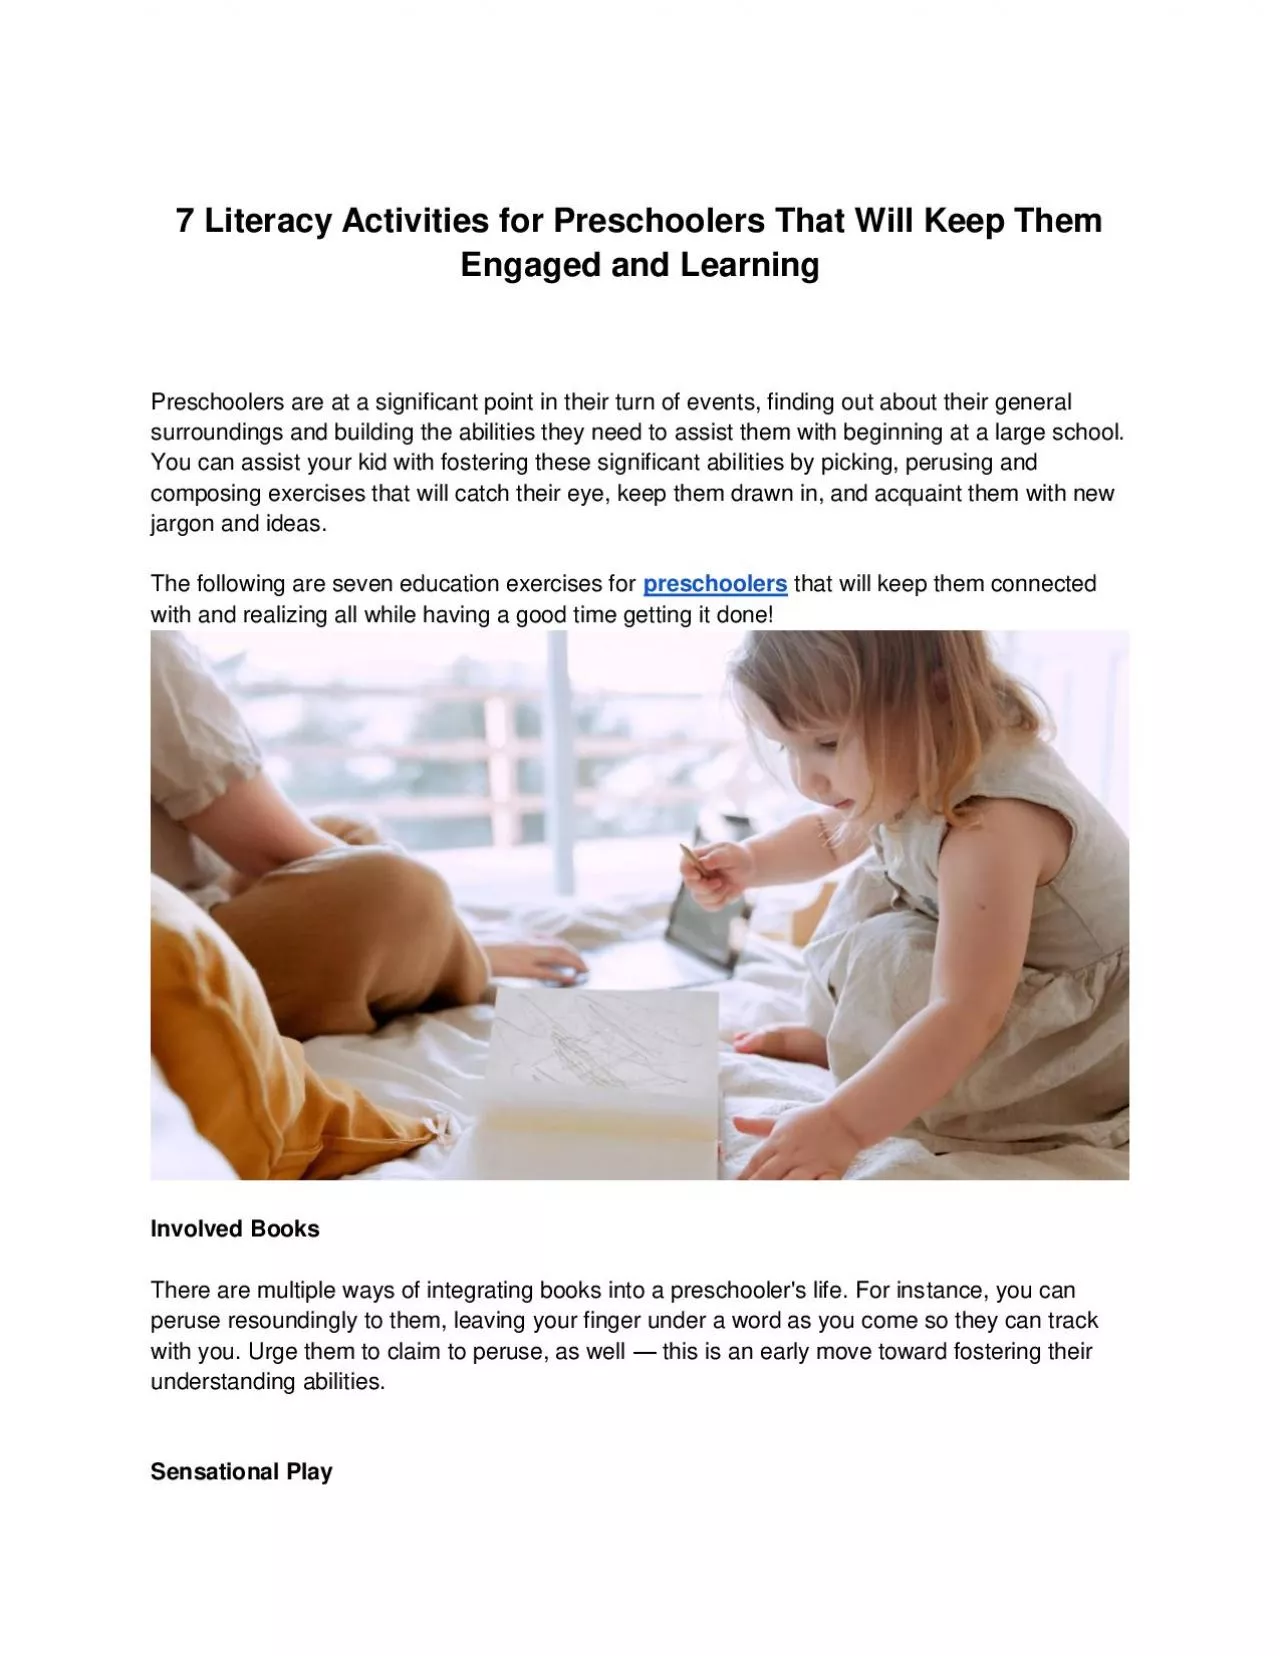 7 Literacy Activities for Preschoolers That Will Keep Them Engaged and Learning